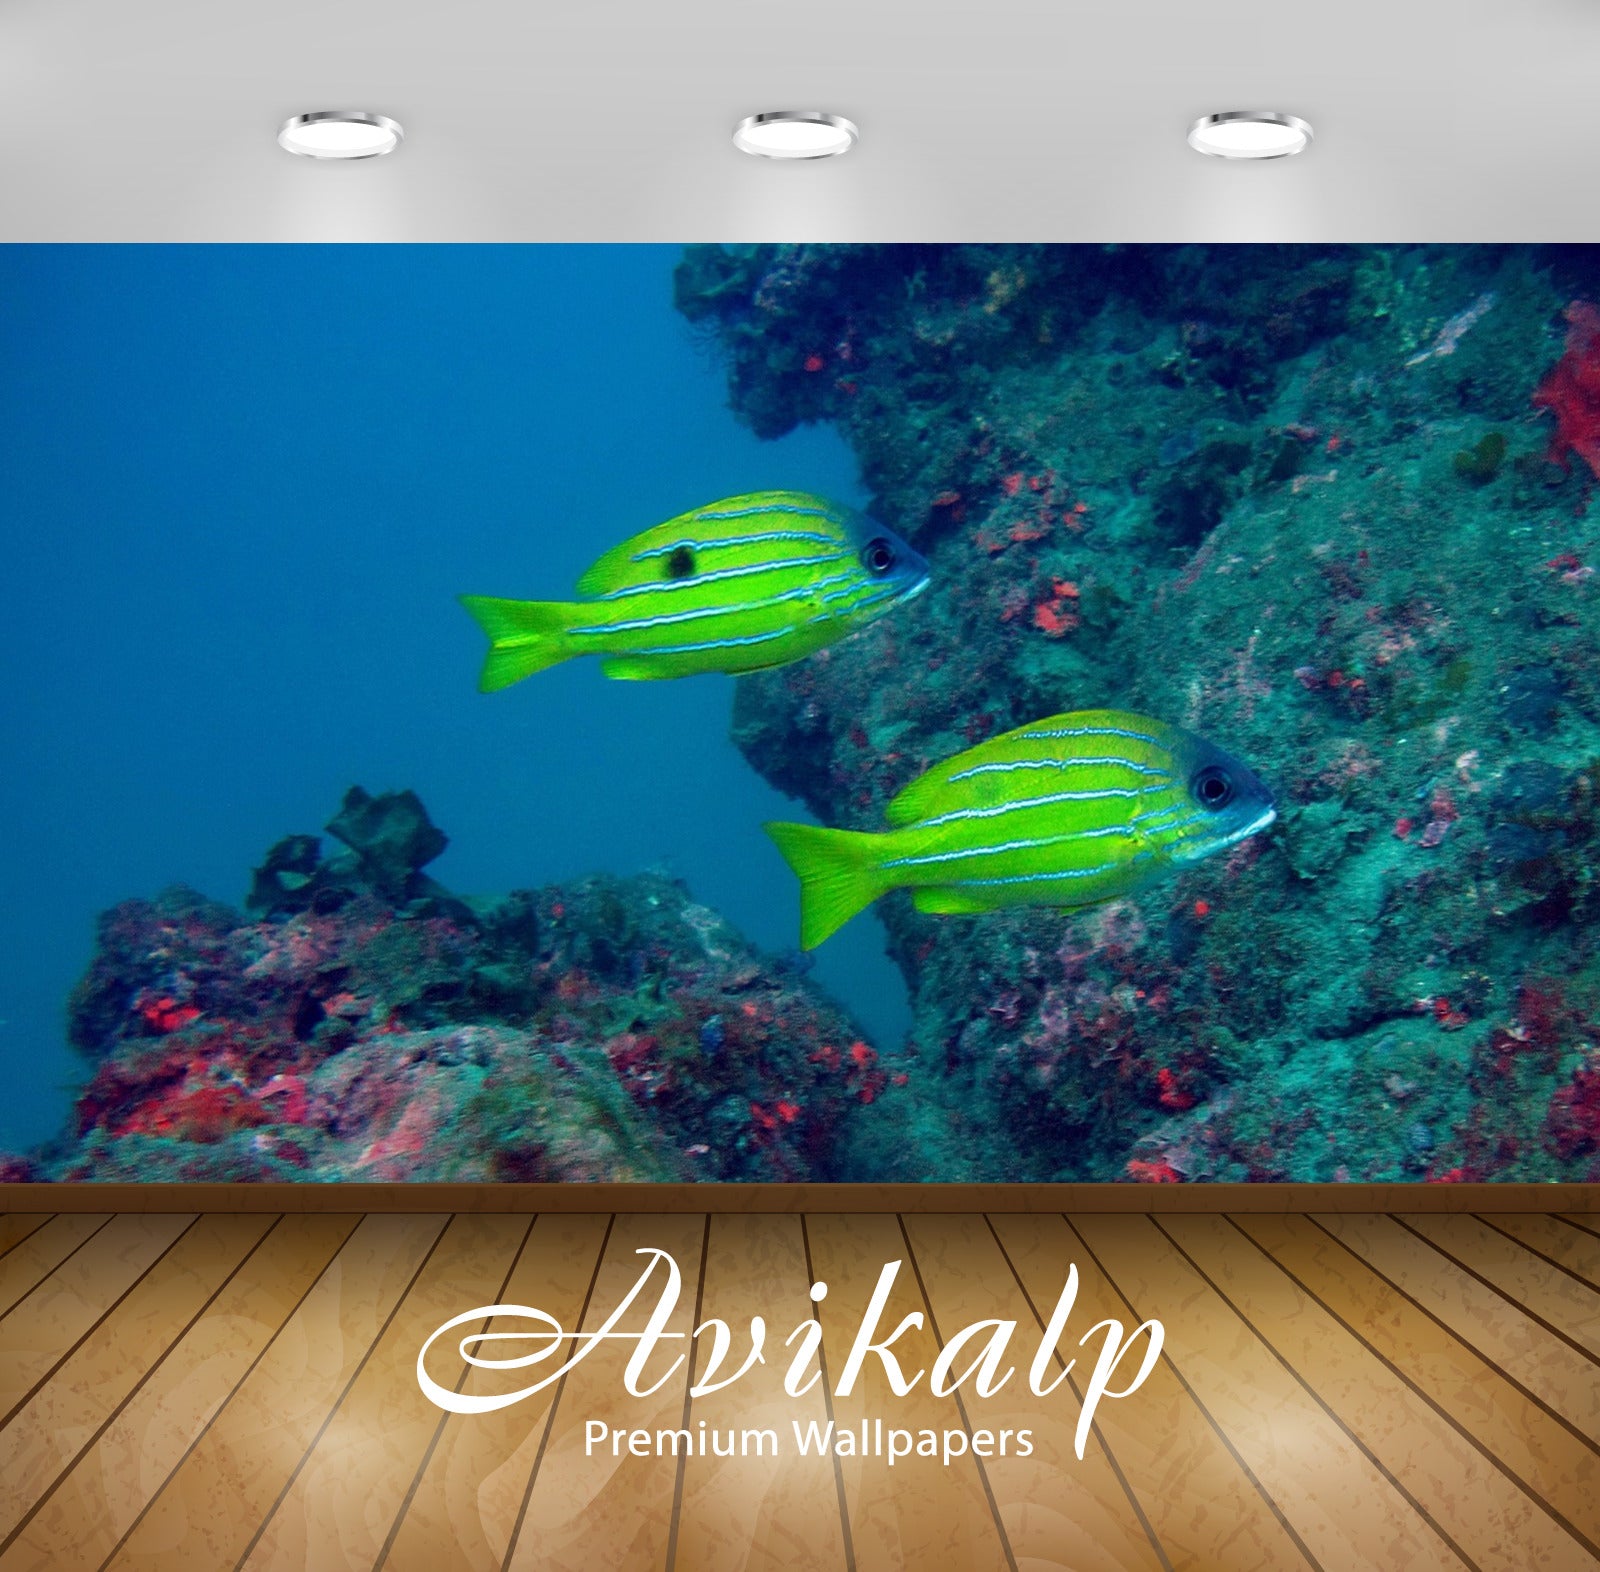 Avikalp Exclusive Awi2630 Five Lined Snapper Full HD Wallpapers for Living room, Hall, Kids Room, Ki